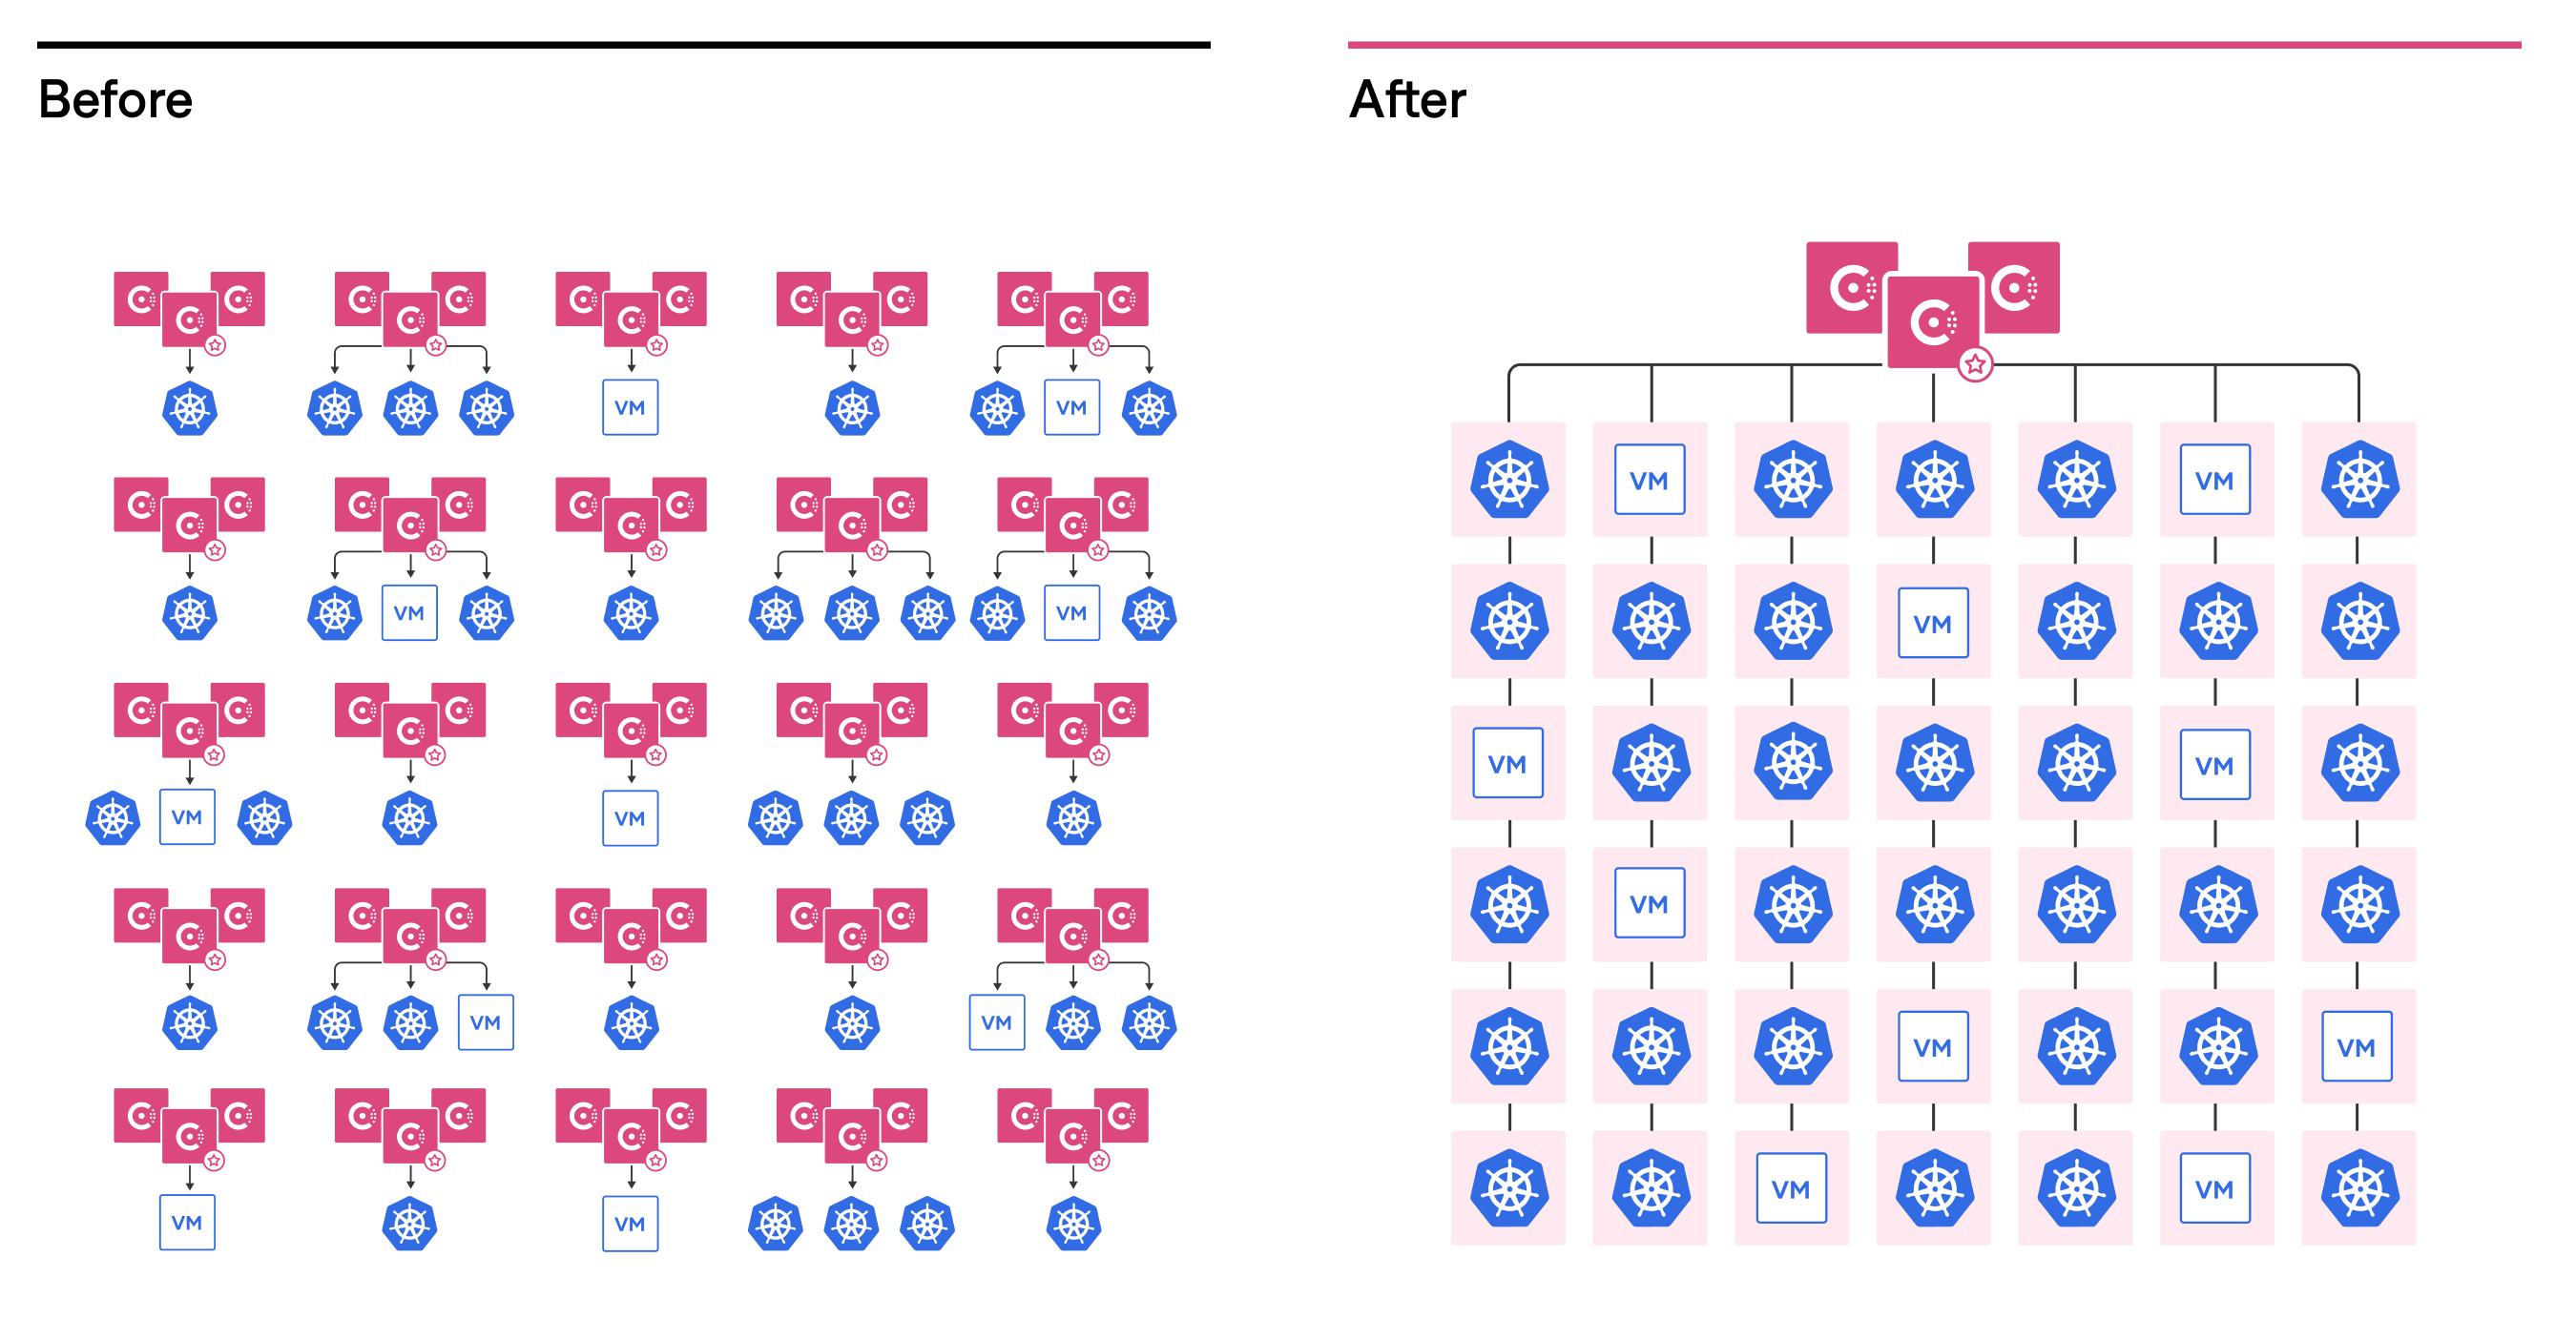 Before: Many use cases with dedicated Consul servers. After: Many use cases sharing a common Consul server cluster and control plane.